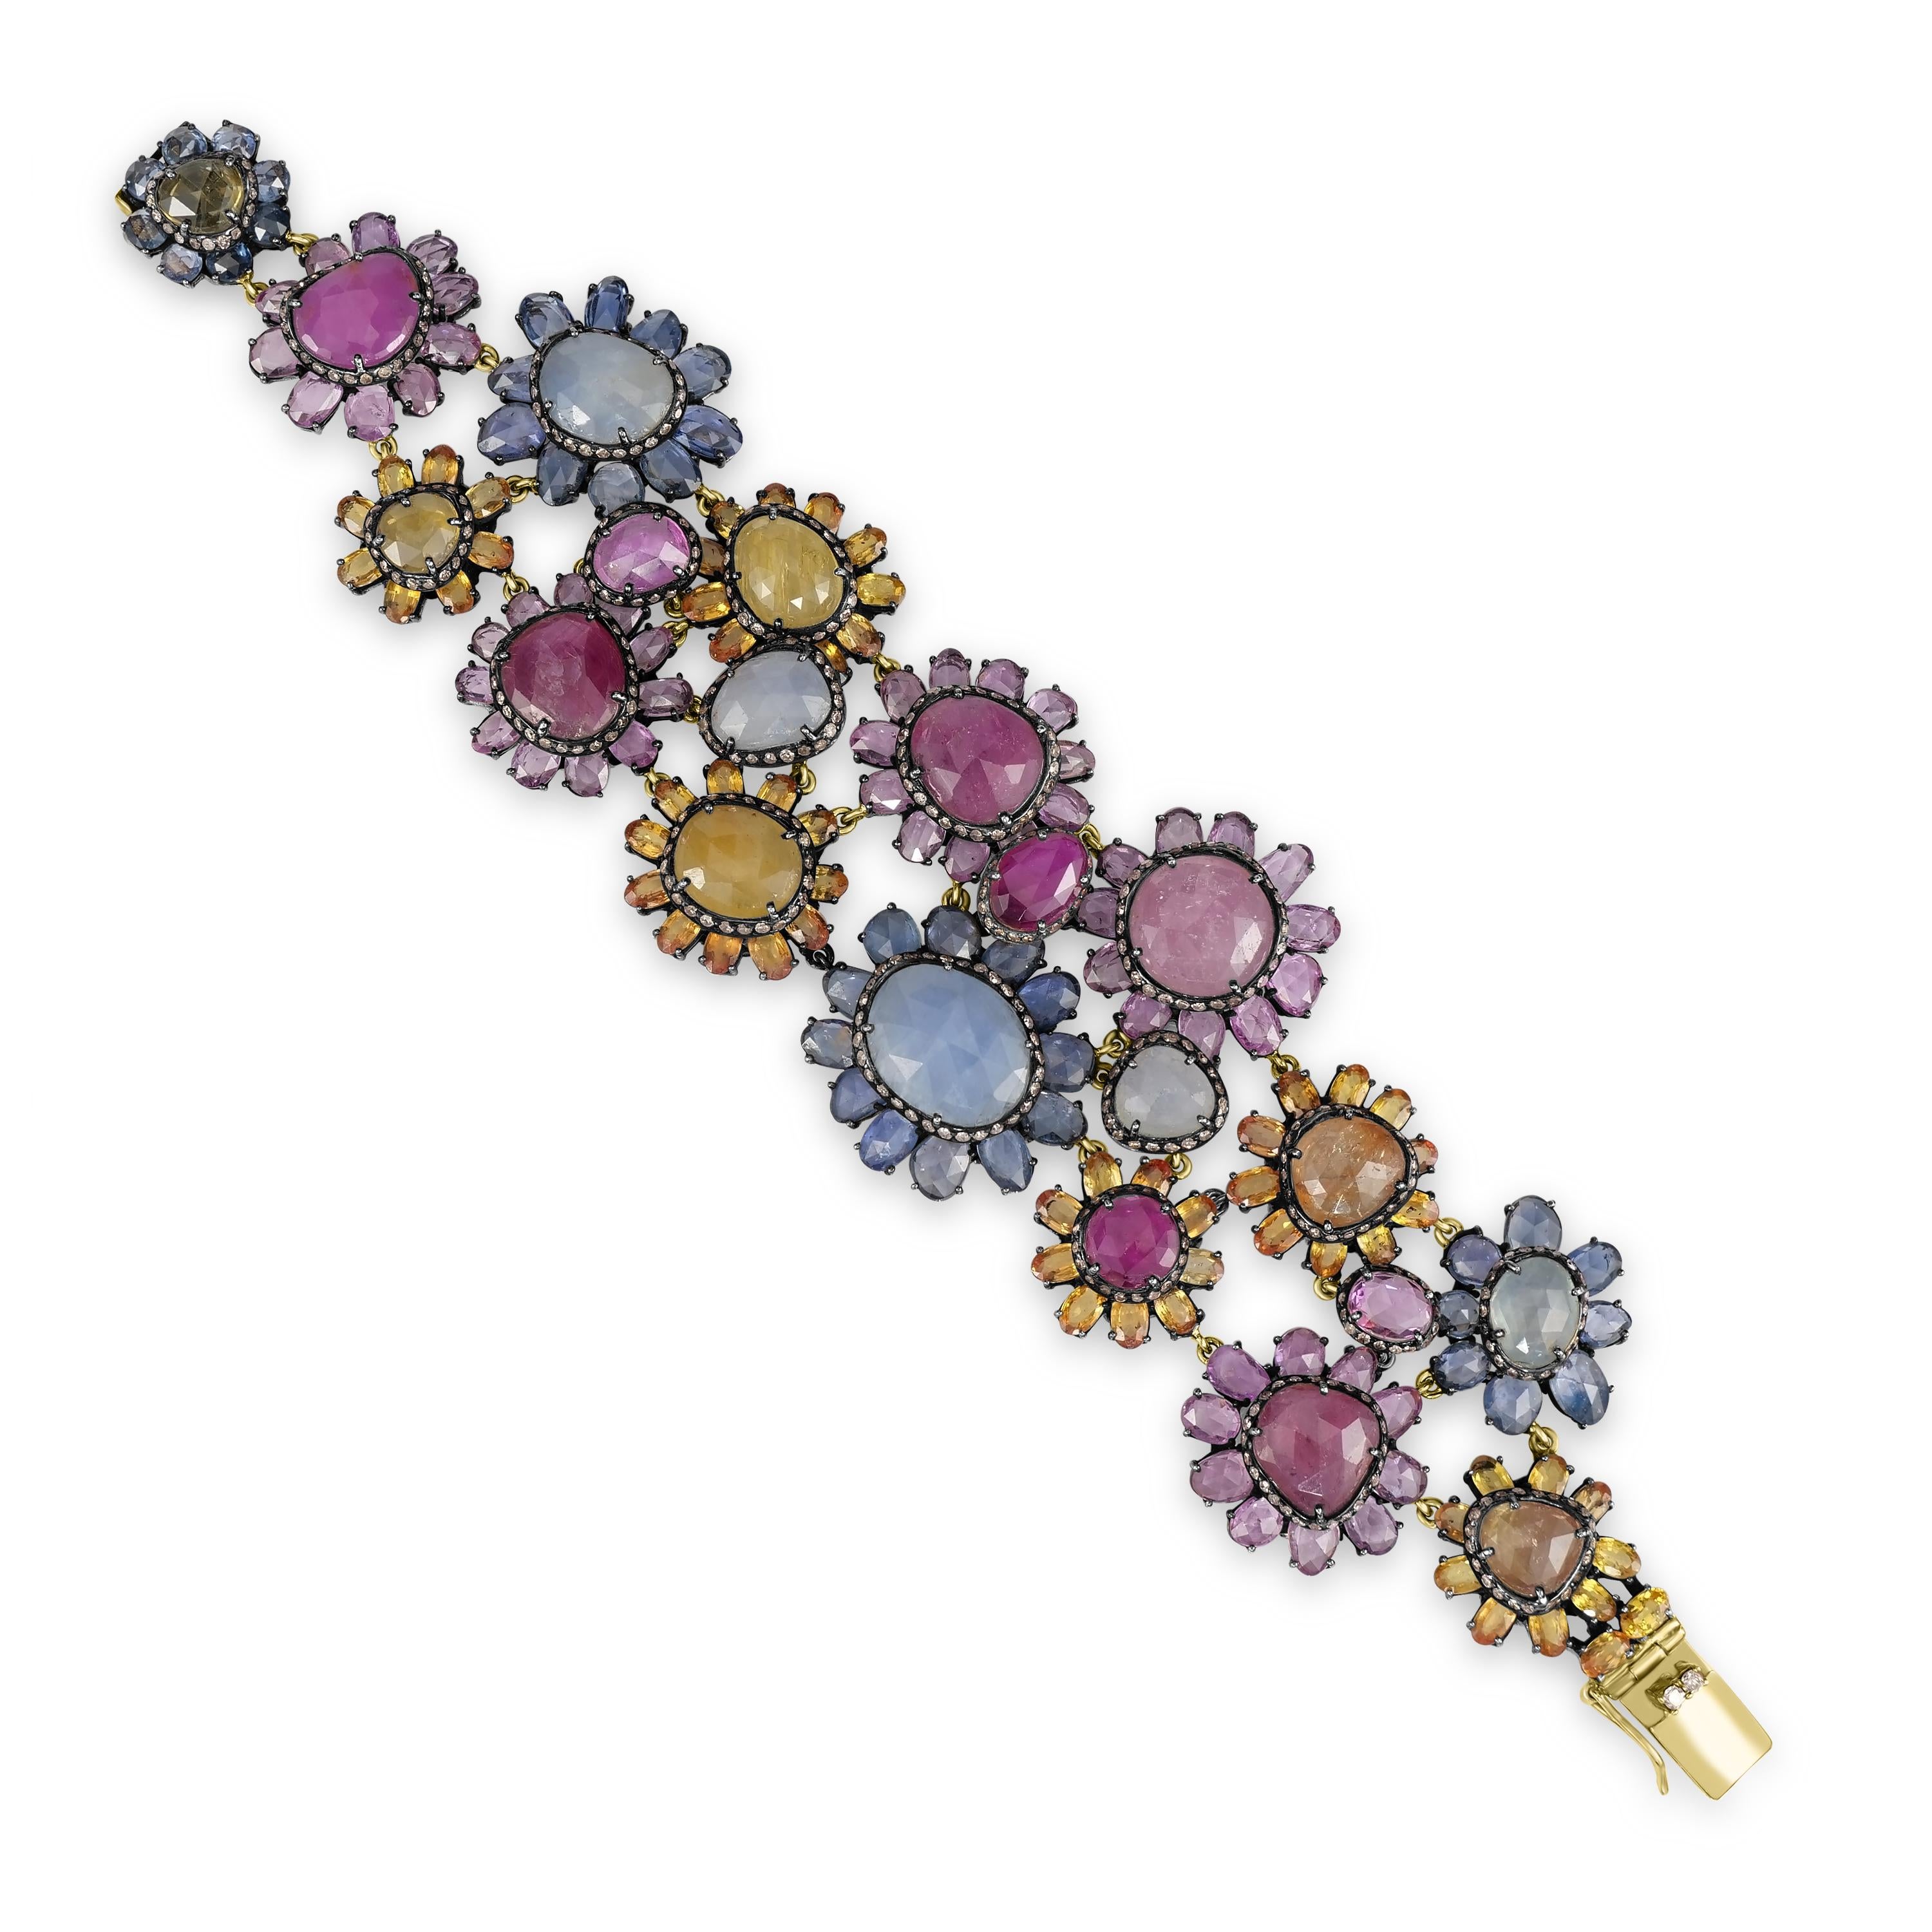 Introducing our breathtaking Victorian 110 Cttw. Sapphire, Ruby, and Diamond Link Bracelet, a true masterpiece of elegance and sophistication.

This stunning bracelet features a captivating collection of floral motifs adorned with vibrant sapphires